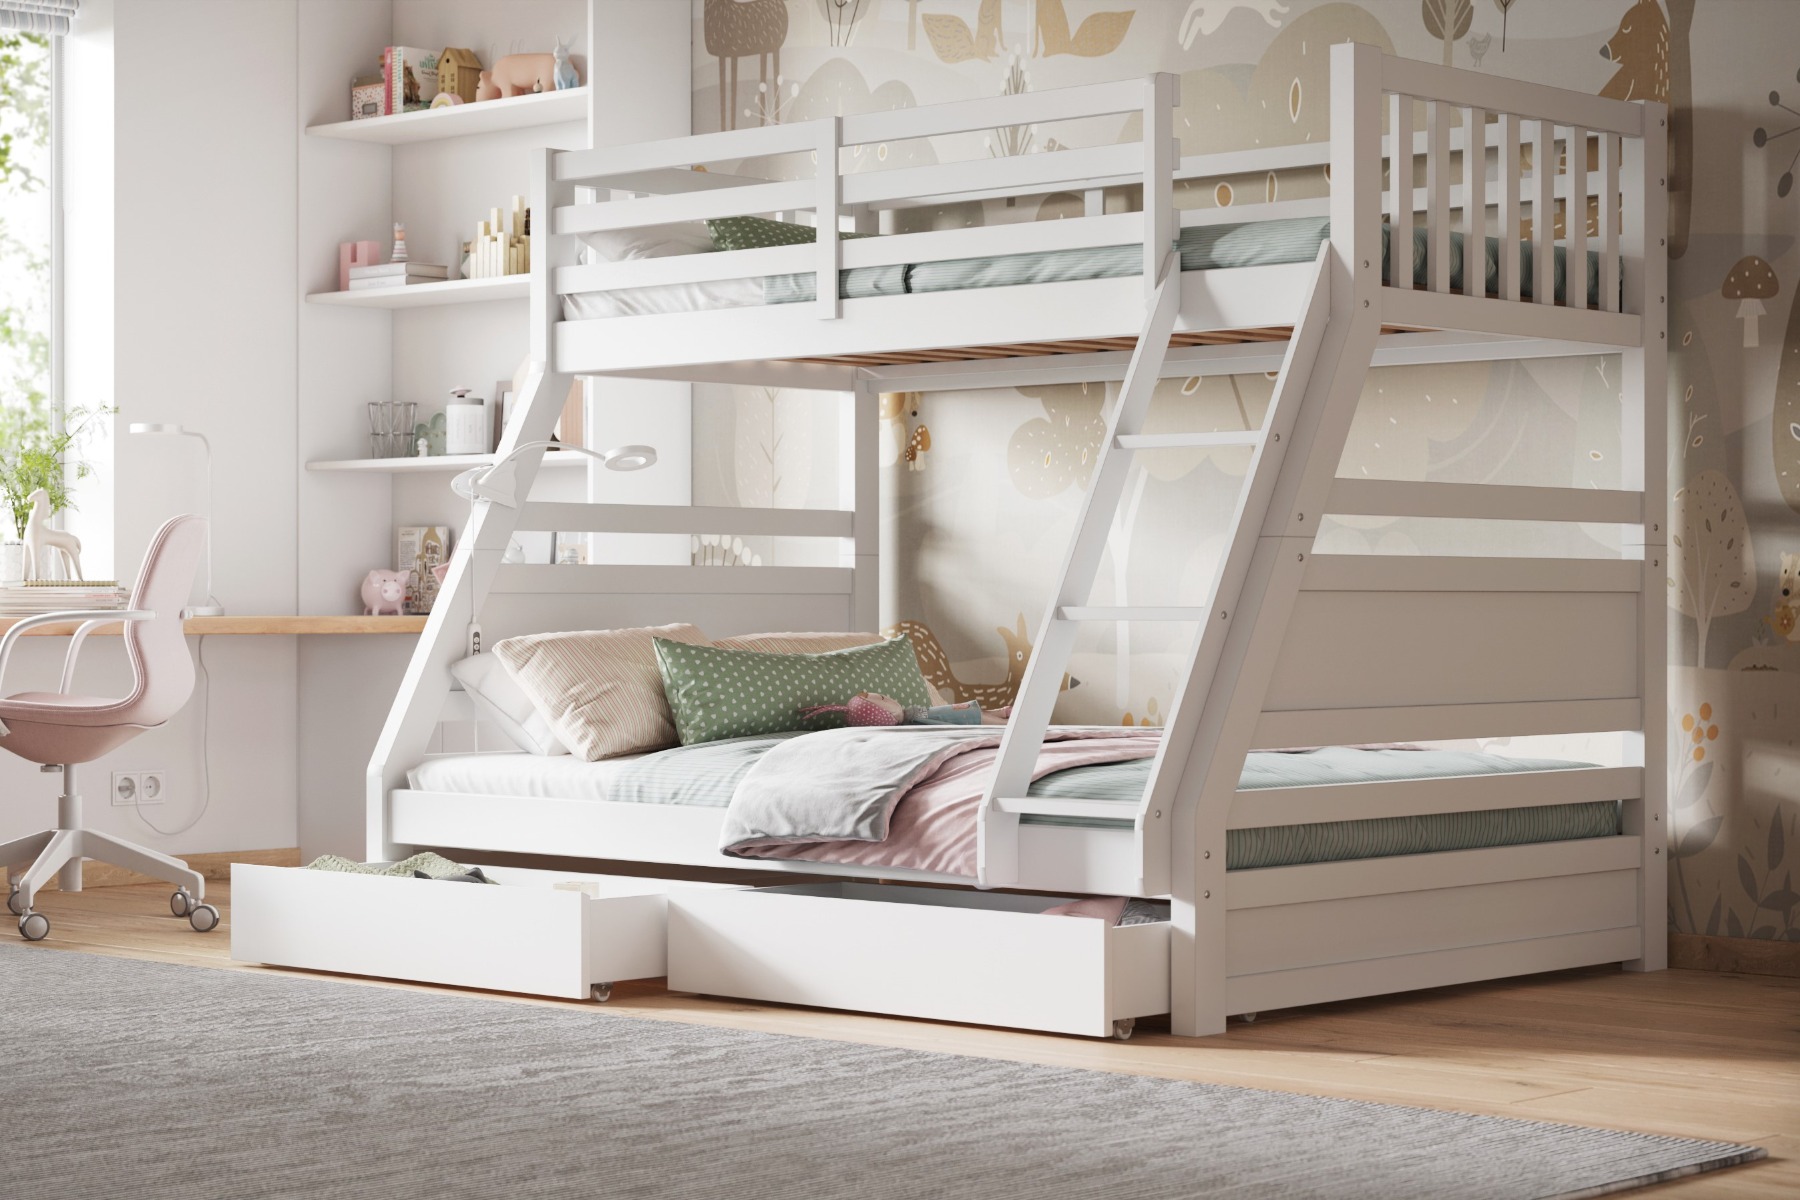 Flair Ollie Wooden Triple Bunk Bed with Drawers White